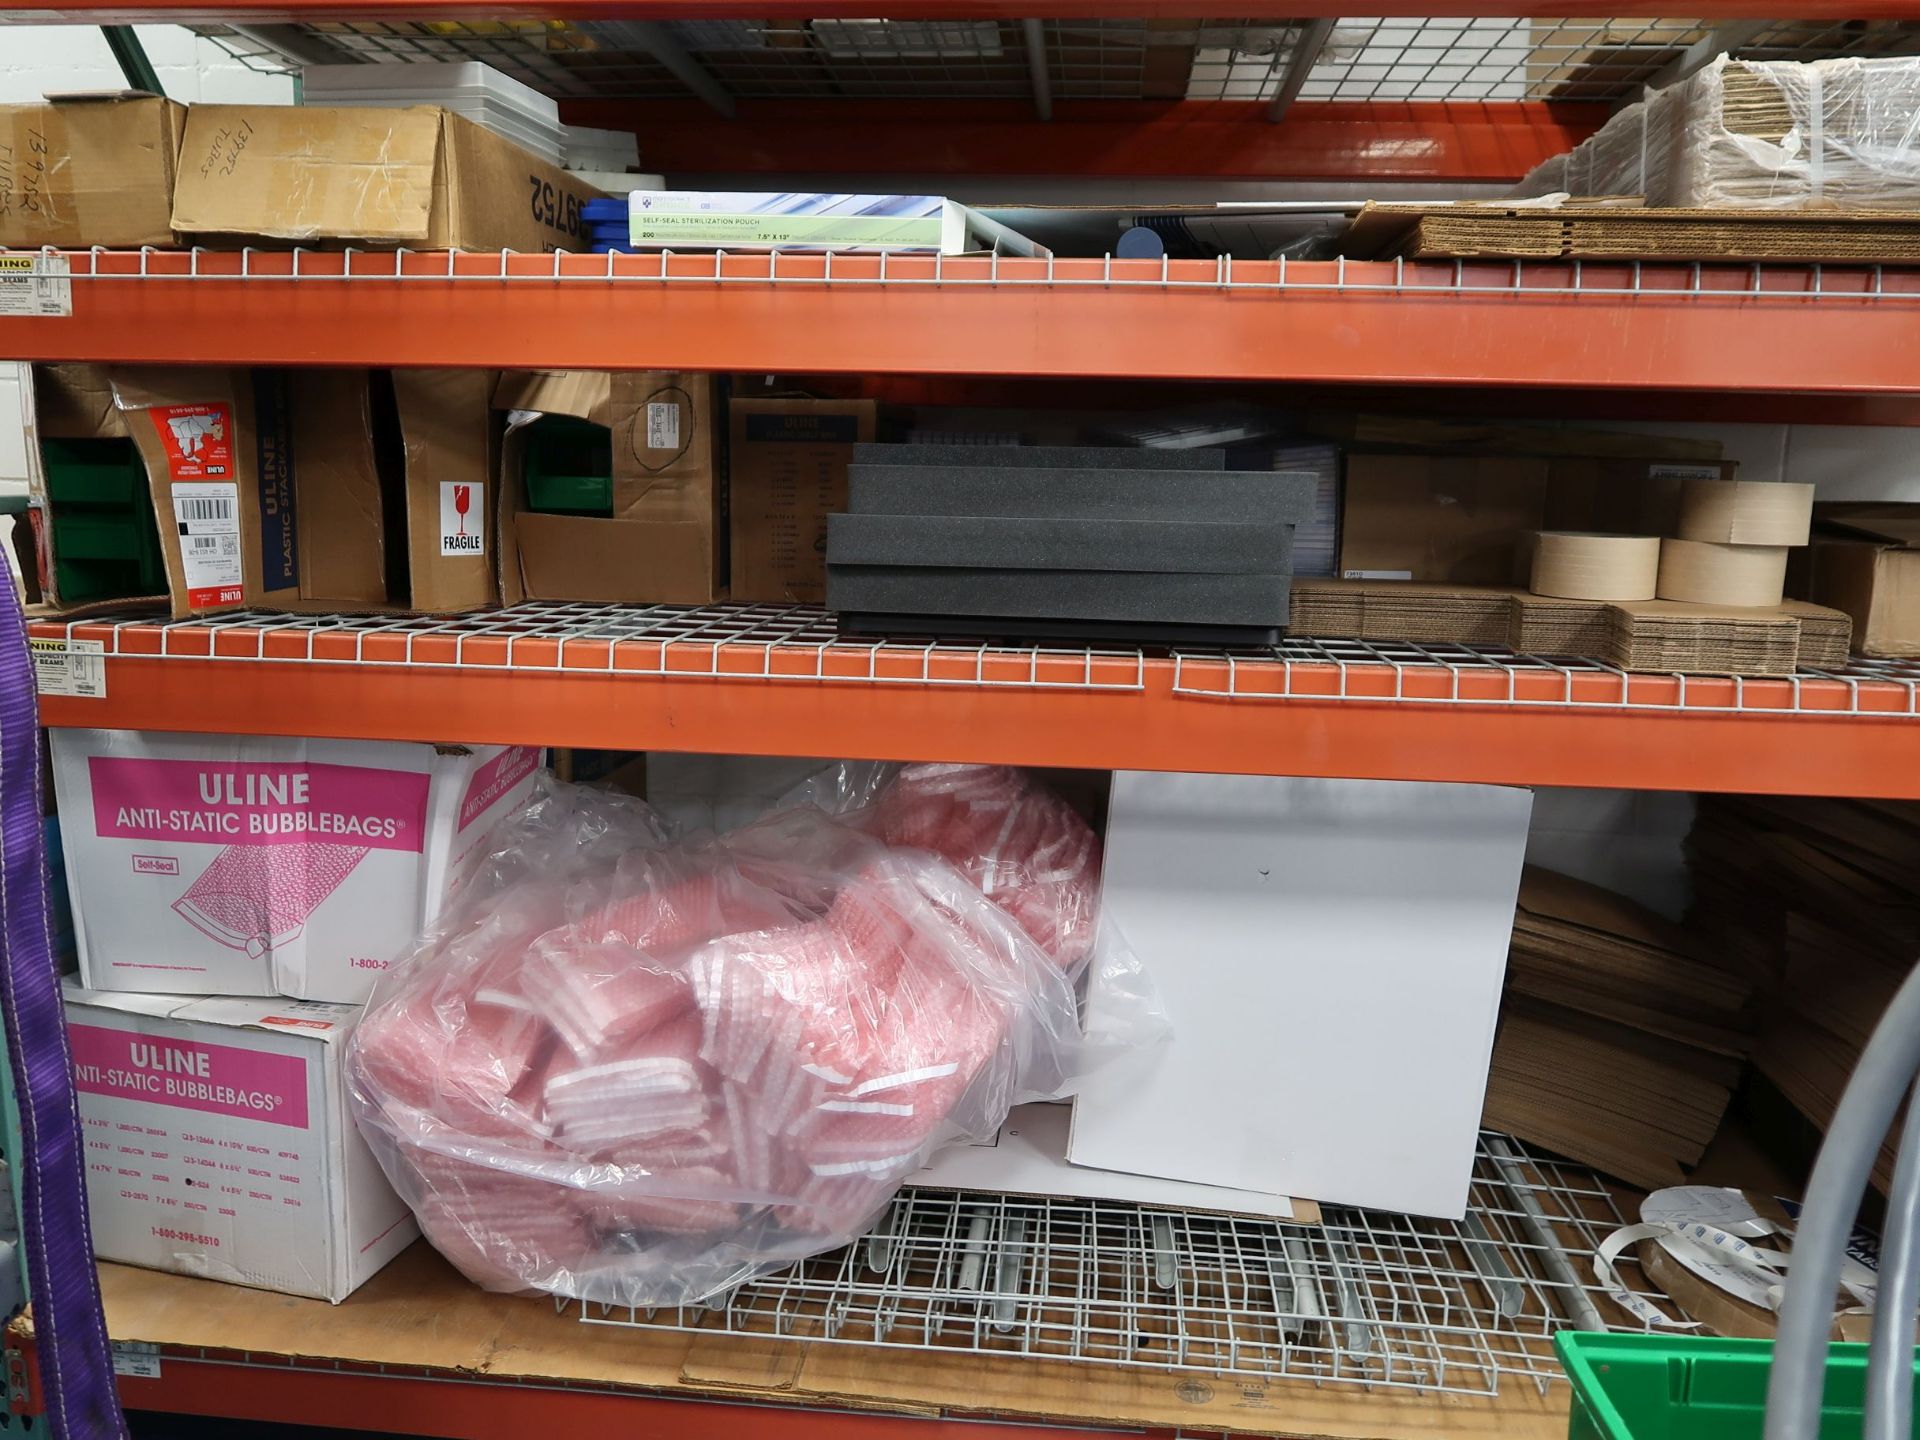 (LOT) MISC. SHIPPING SUPPLIES ON (4) ROWS OF SHELVING *NO RACK OR WIRE DECKING BEAMS* - Image 2 of 2